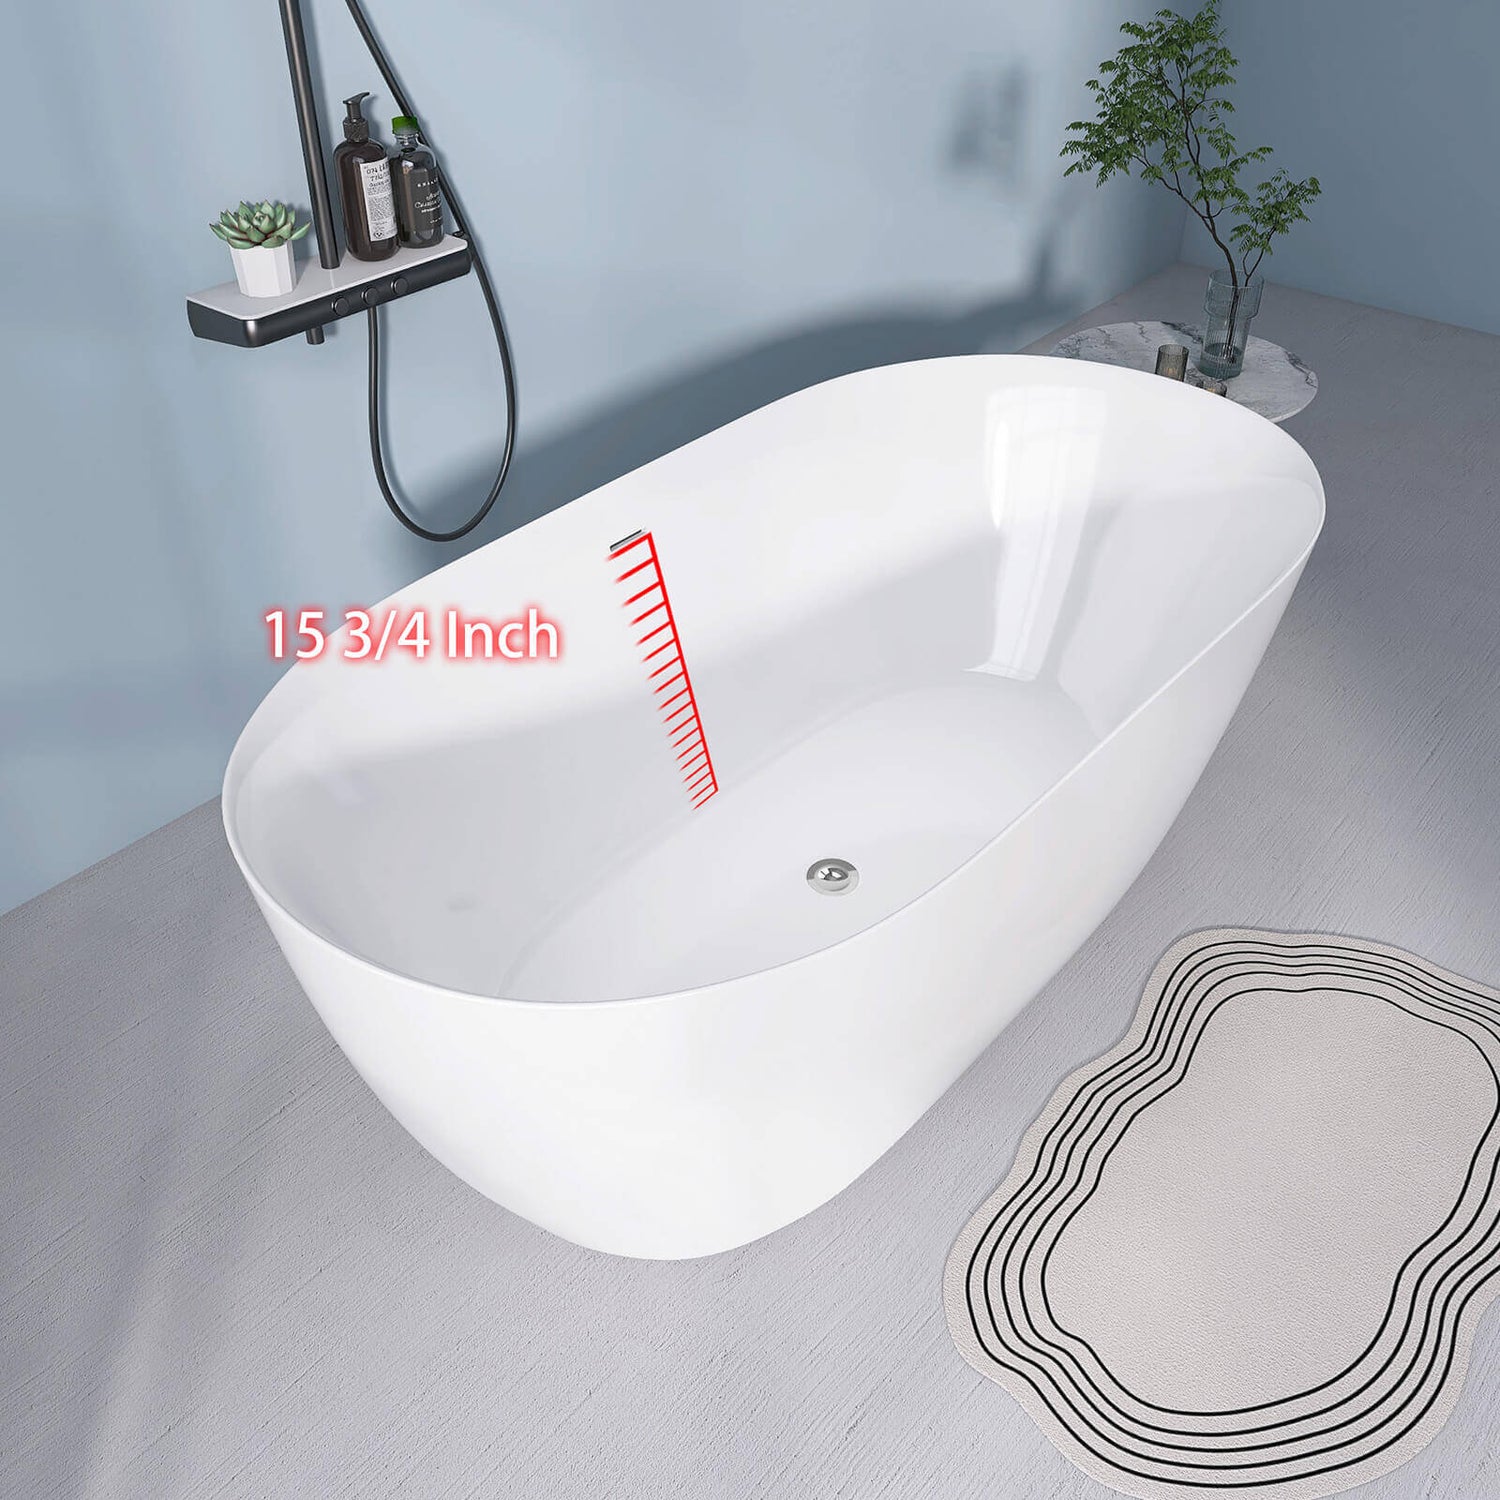 51 Inch Acrylic Freestanding Soaking Tub Overflow Location from Bottom